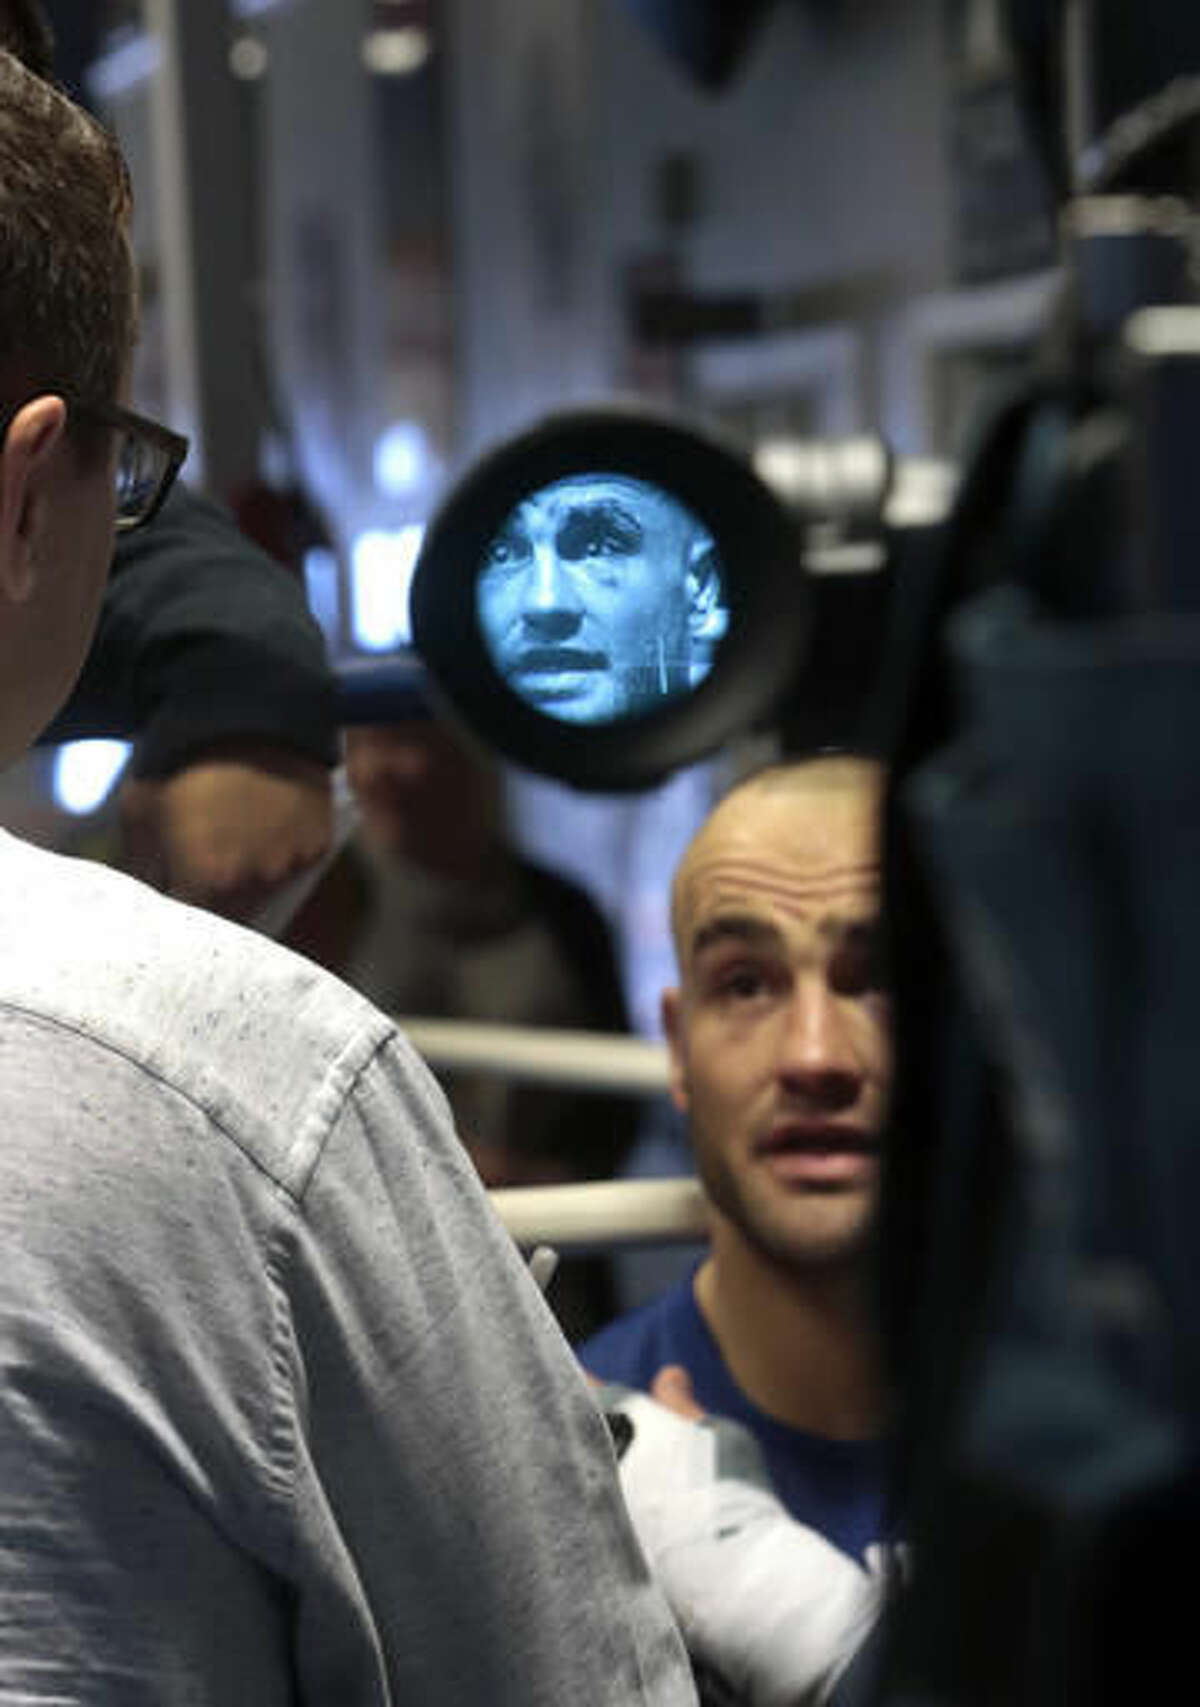 In this Wednesday Nov. 2, 2016 photo, UFC lightweight champion Eddie Alvarez is interviewed following a workout in Philadelphia. Alvarez is scheduled to face featherweight champion Connor McGregor to defend his lightweight belt on Nov. 12 in what will be the first UFC card to be held in New York after the state legislature legalized the sport earlier this year. (AP Photo/Jacqueline Larma)